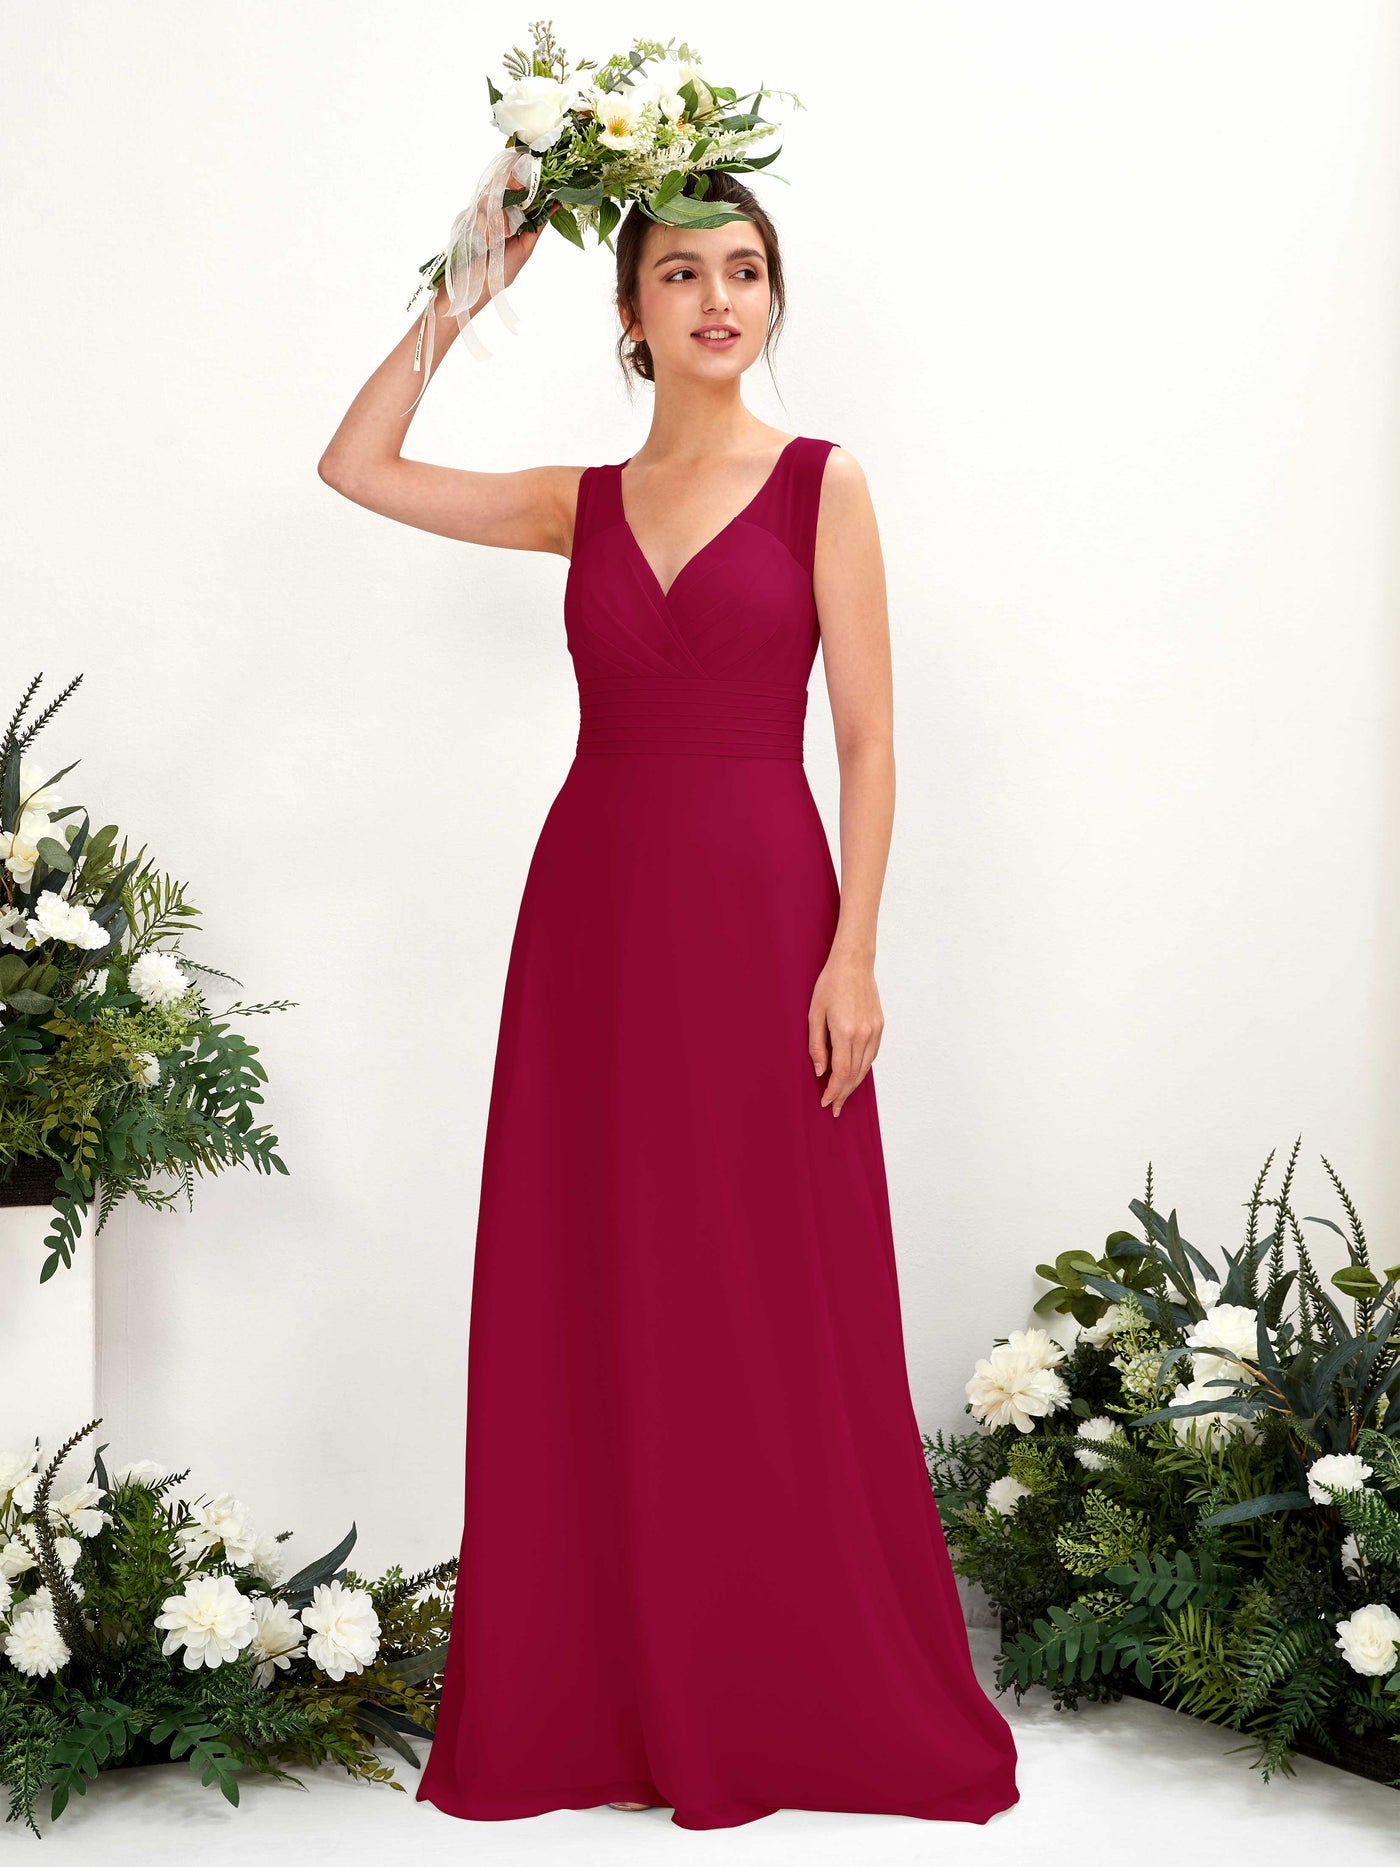 Jester Red Bridesmaid Dresses Bridesmaid Dress A-line Chiffon Straps Full Length Sleeveless Wedding Party Dress (81220941)#color_jester-red